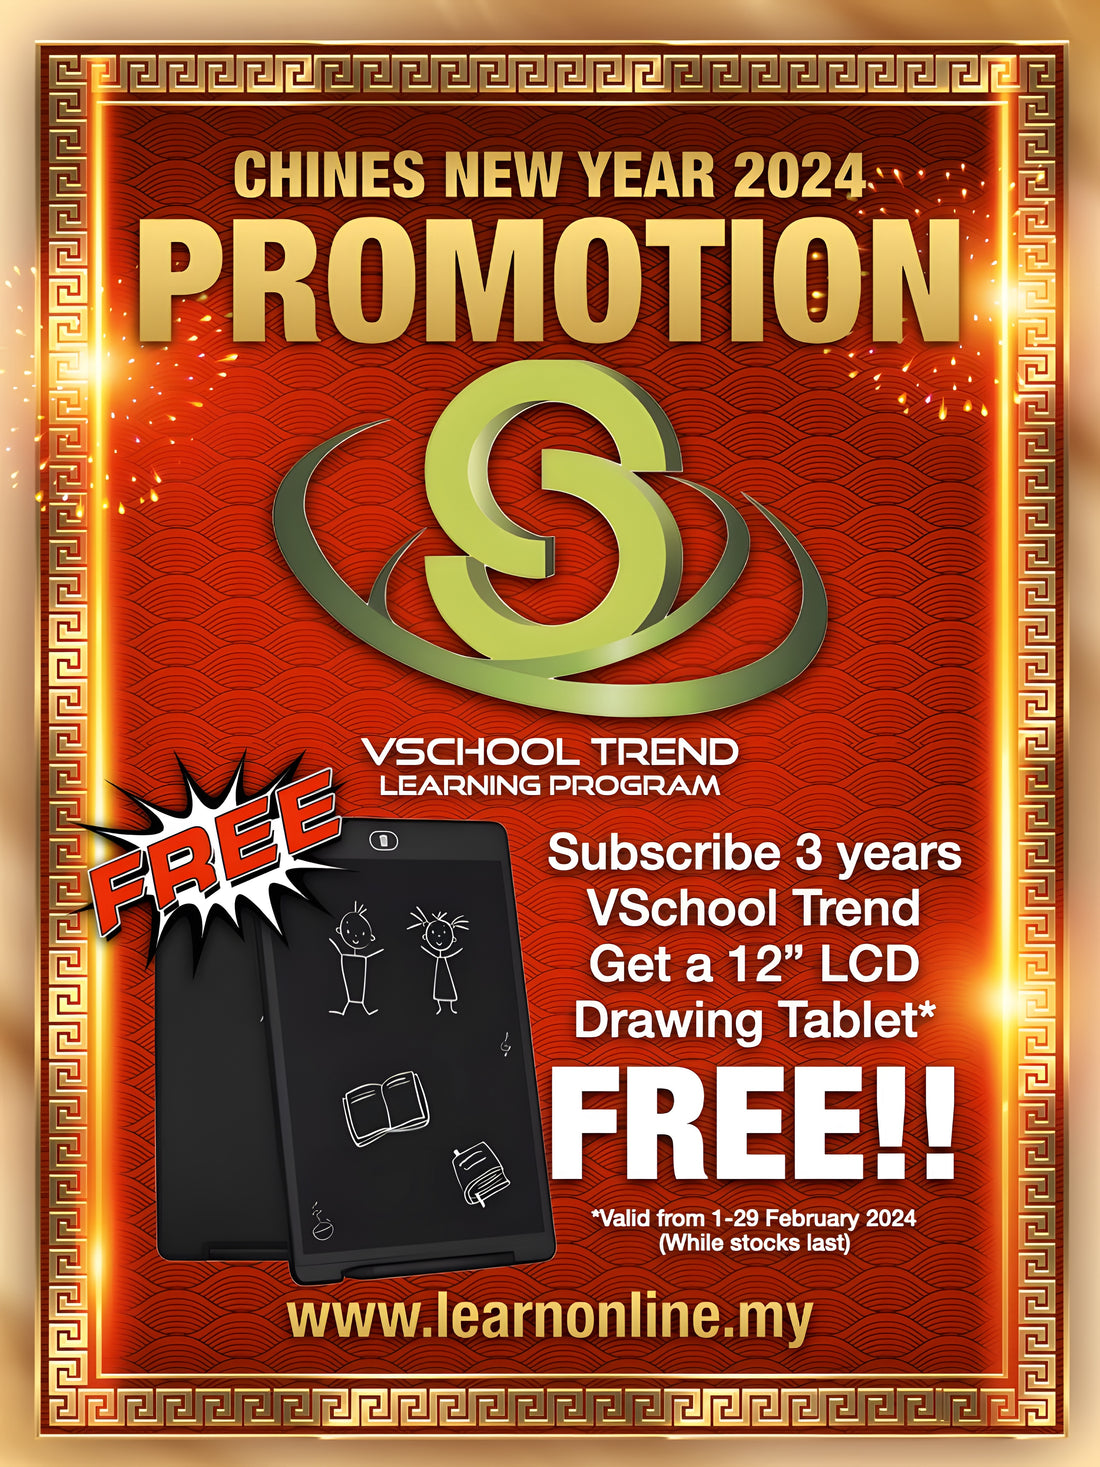 VSchool Trend Learning Program: Chinese New Year 2024 Promotion